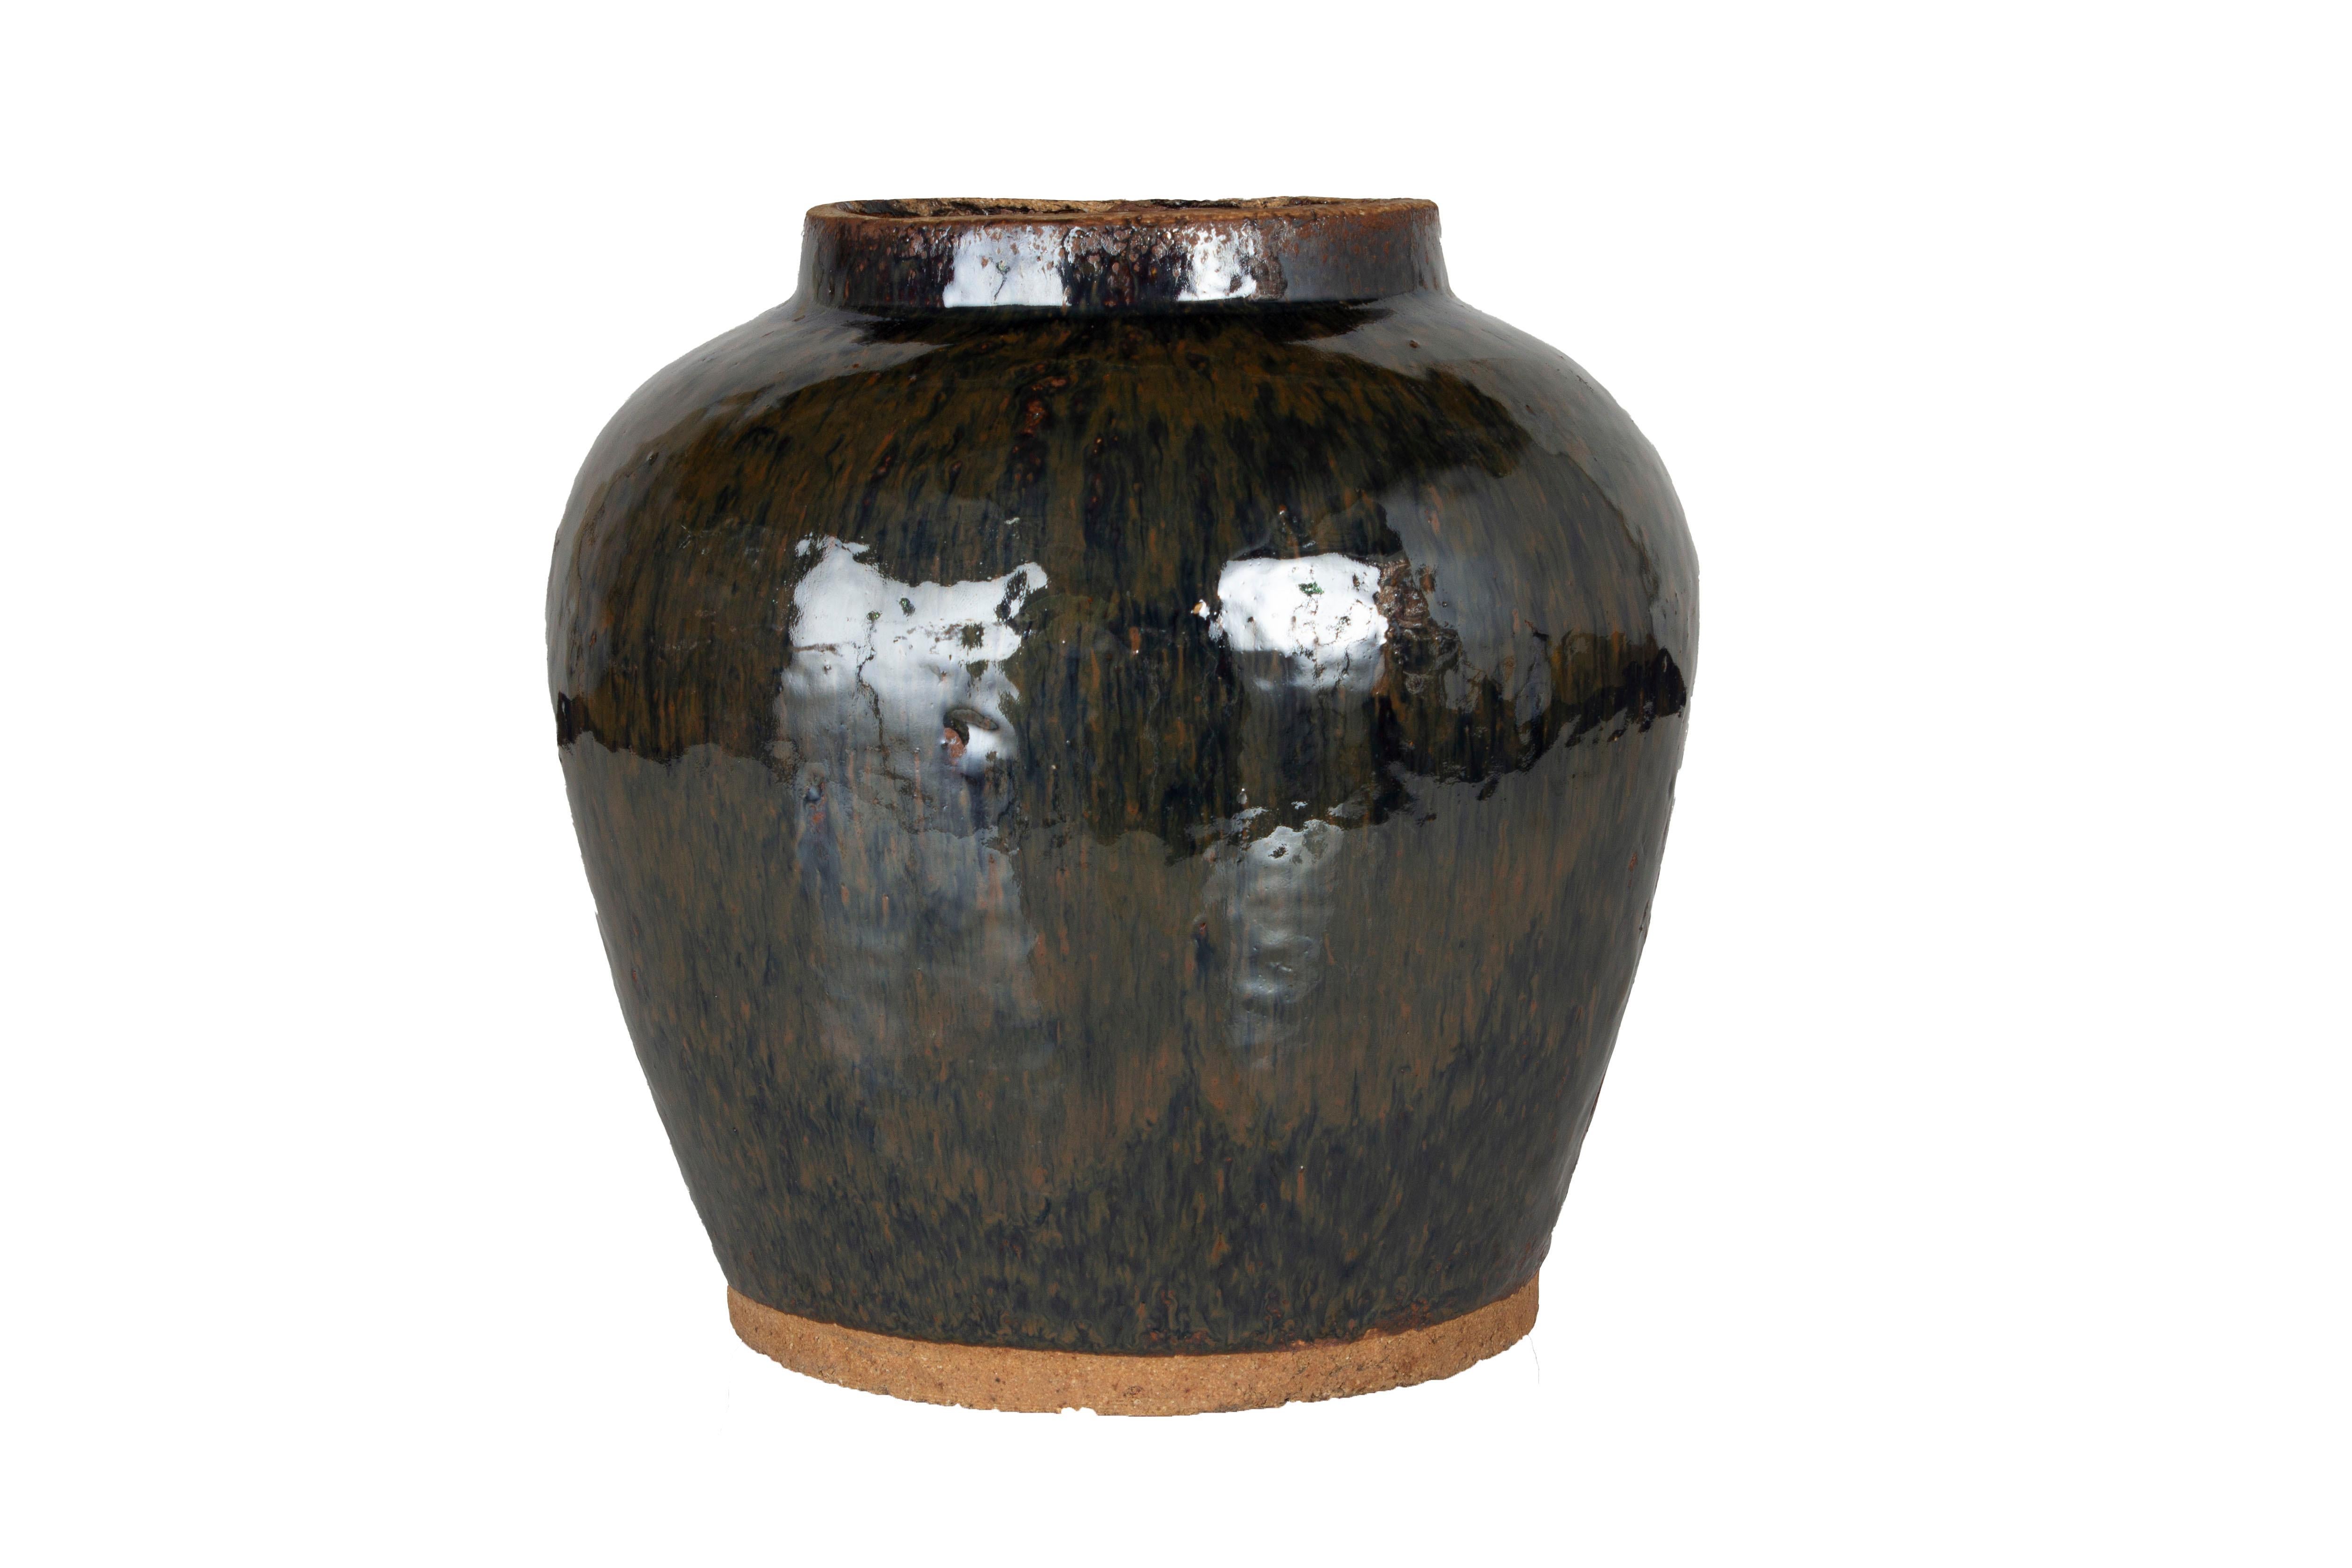 Vintage ceramic glazed storage jar.

 This piece is a part of Brendan Bass’s one-of-a-kind collection, Le Monde. French for “The World”, the Le Monde collection is made up of rare and hard to find pieces curated by Brendan from estate sales,